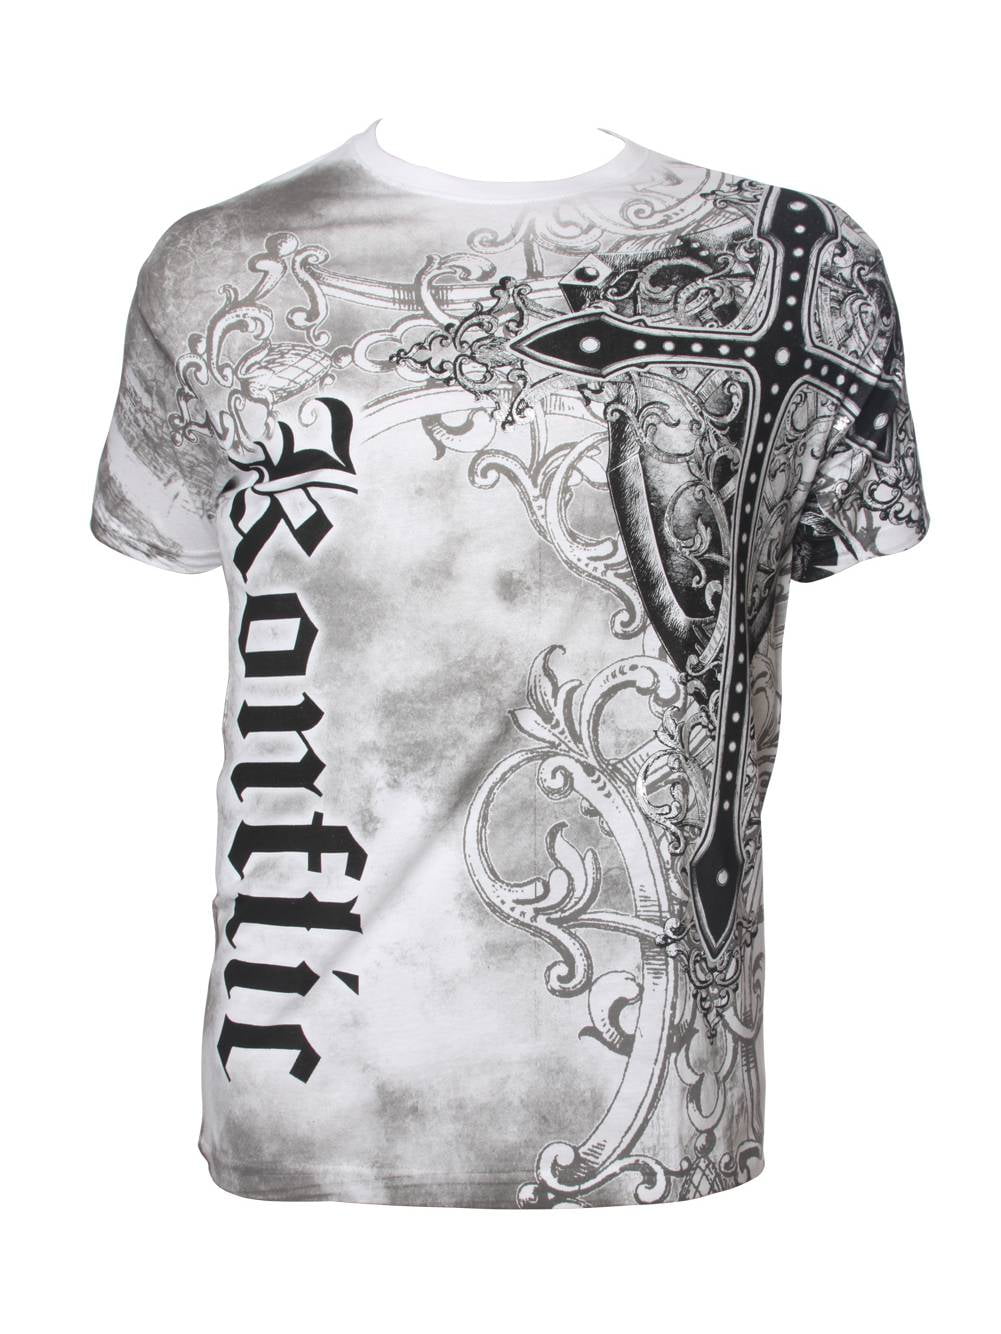 Konflic NWT Men's Giant Cross Graphic Designer MMA Muscle T-Shirt